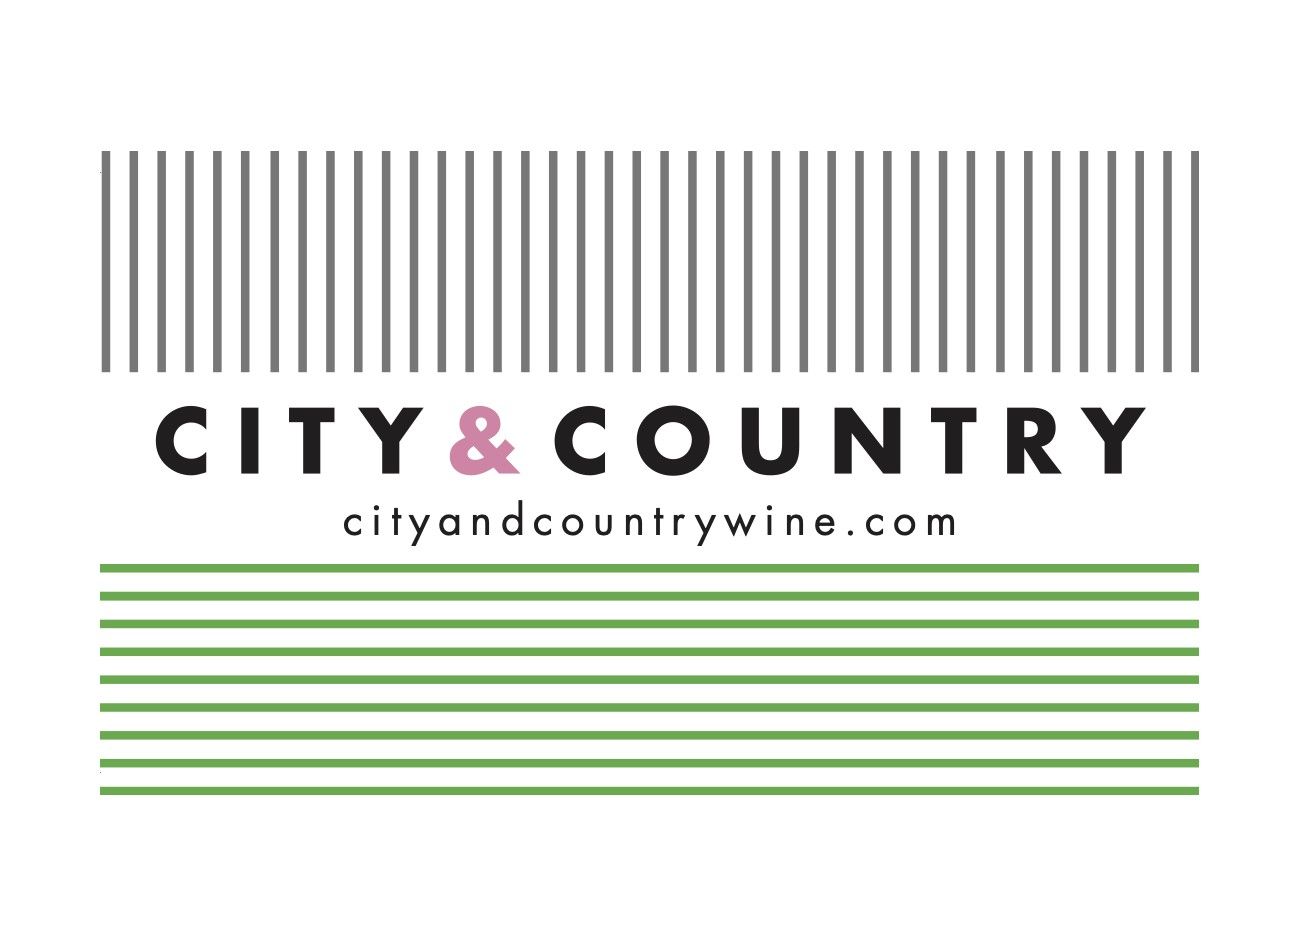 Where City Meets Country - City & Country Winery